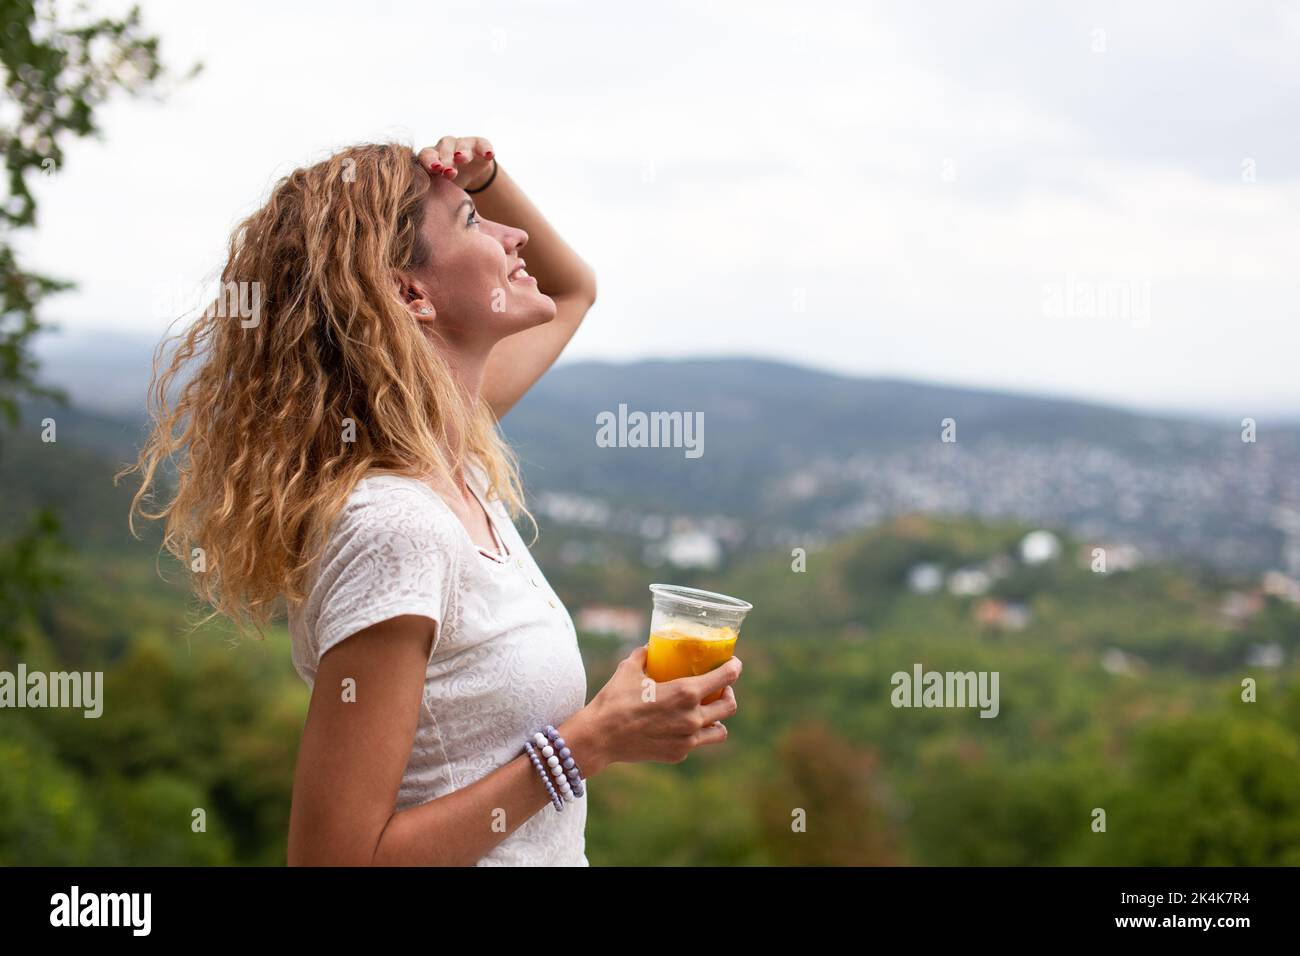 Young Caucasian 30s woman with curly hair gazing the sky outdoors Stock Photo